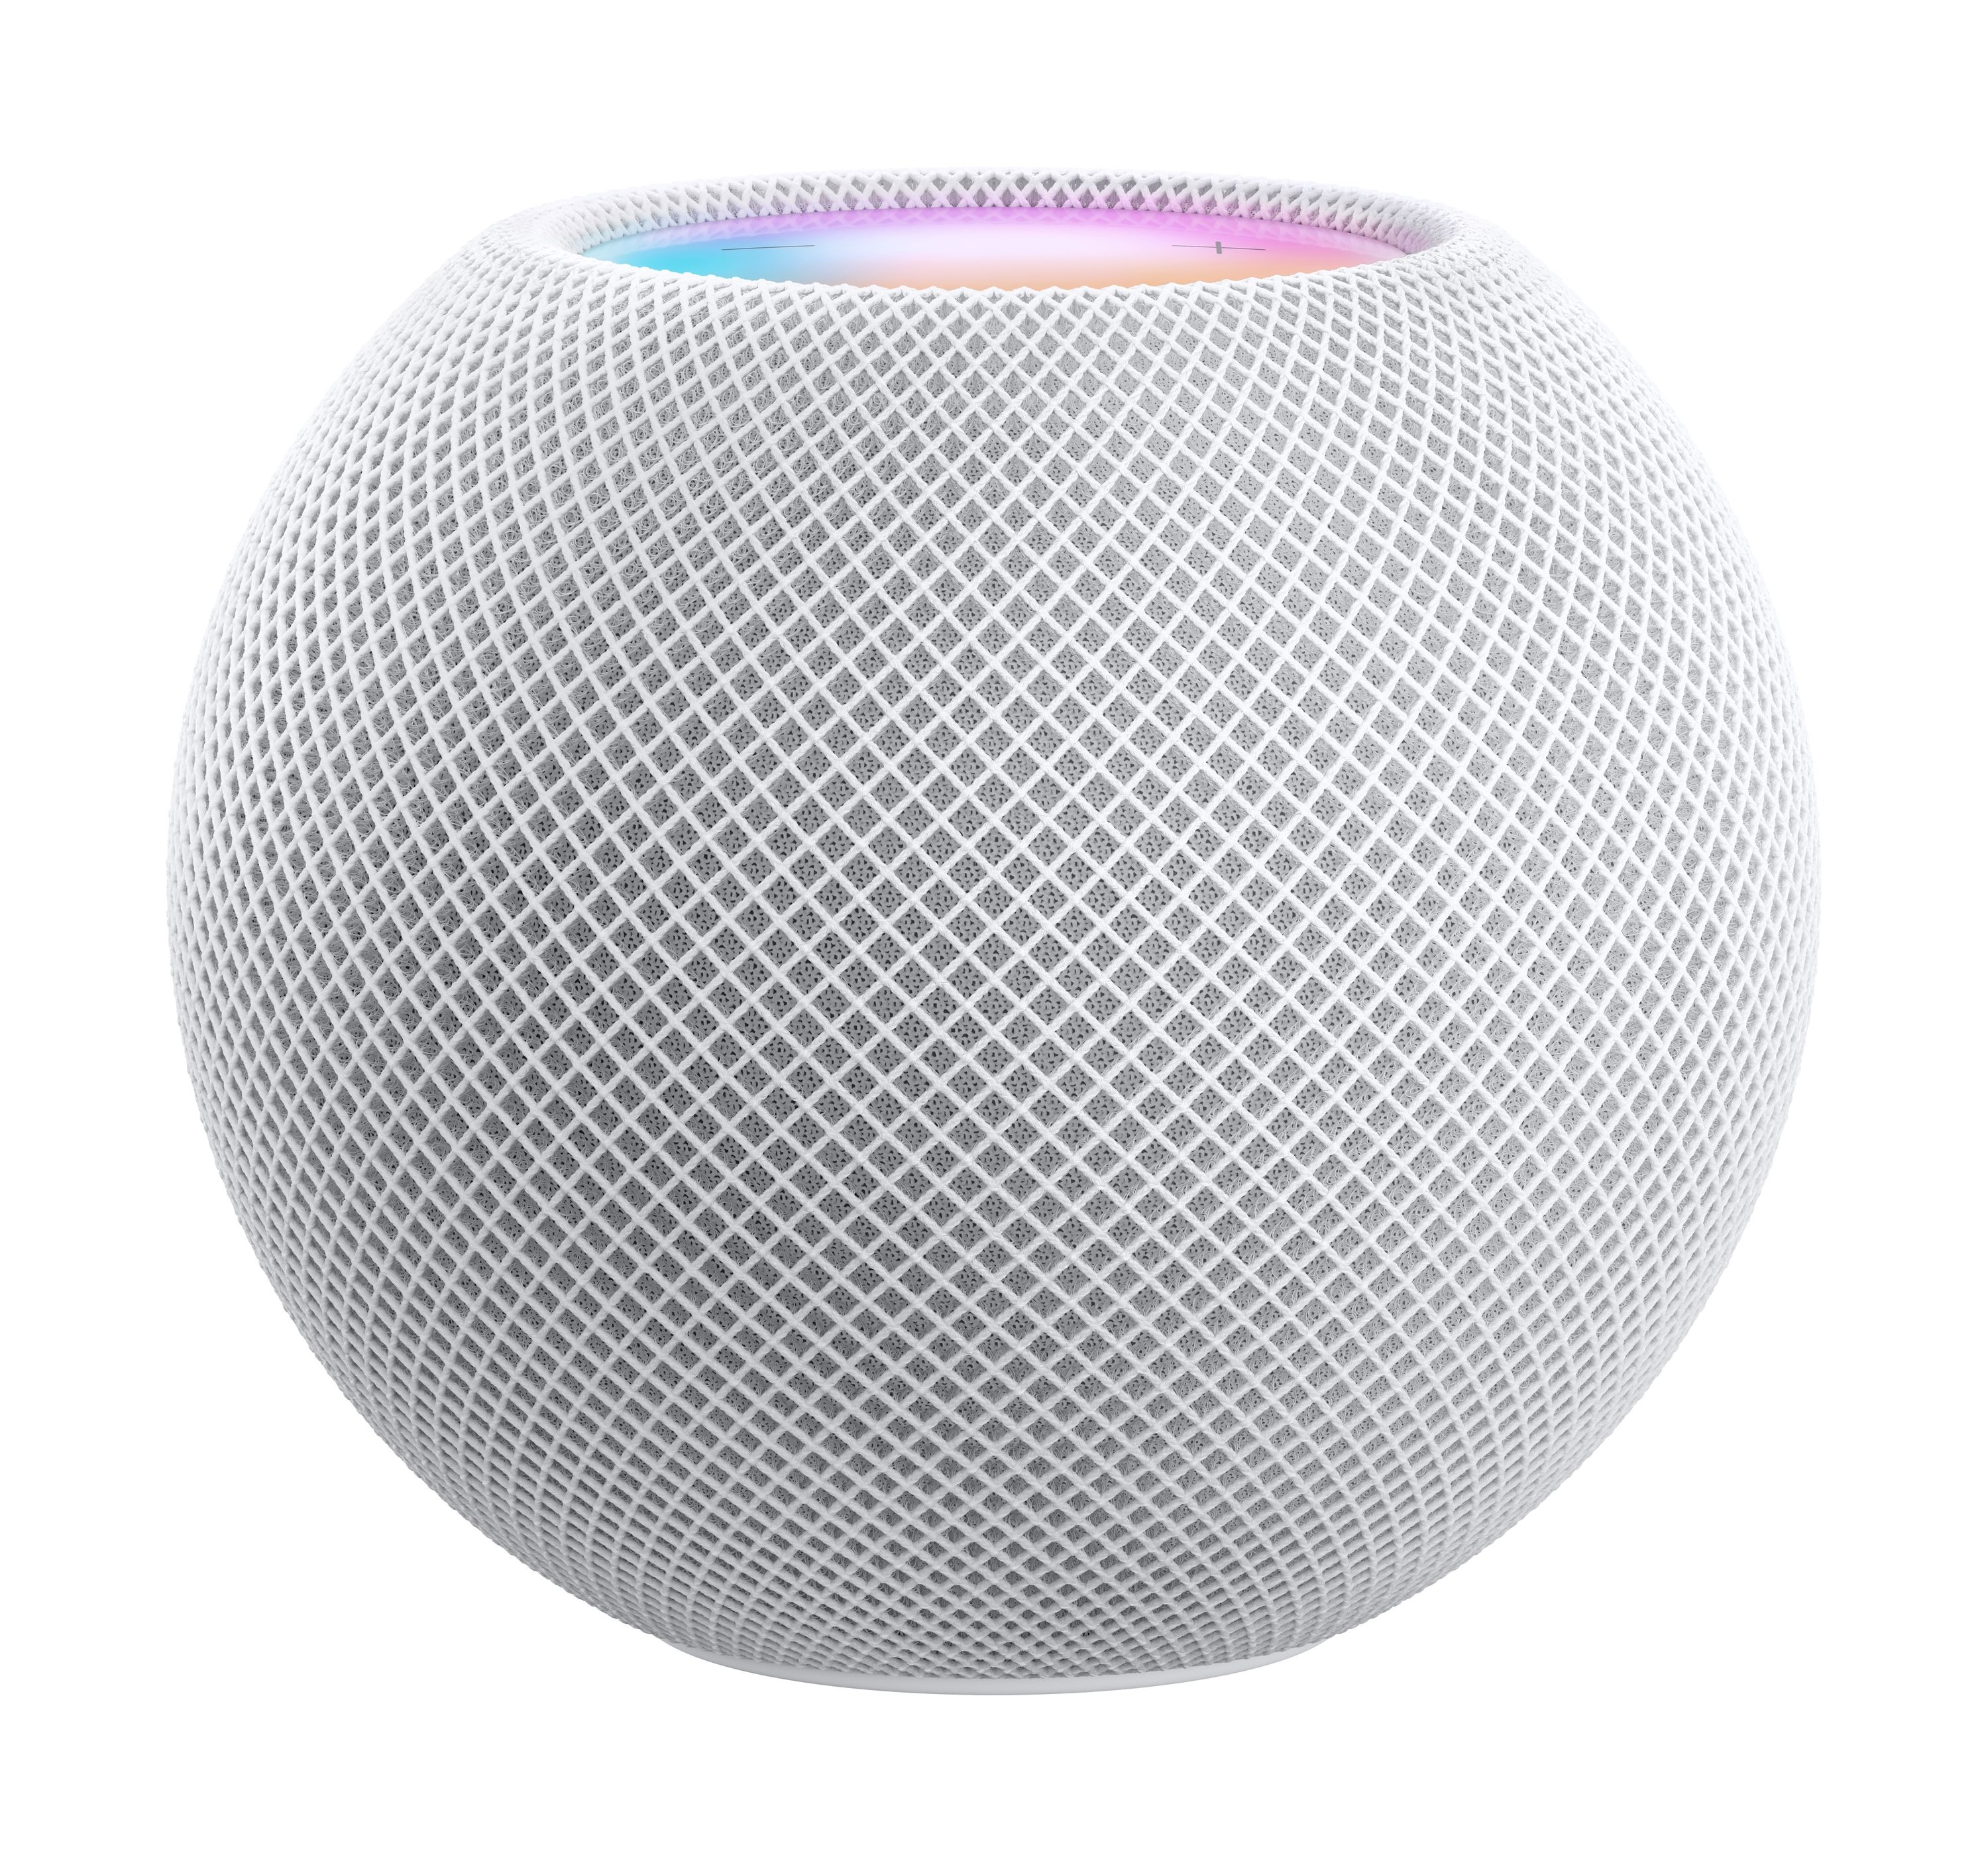 Apple Home Pod Mini - White in the Speakers department at Lowes.com